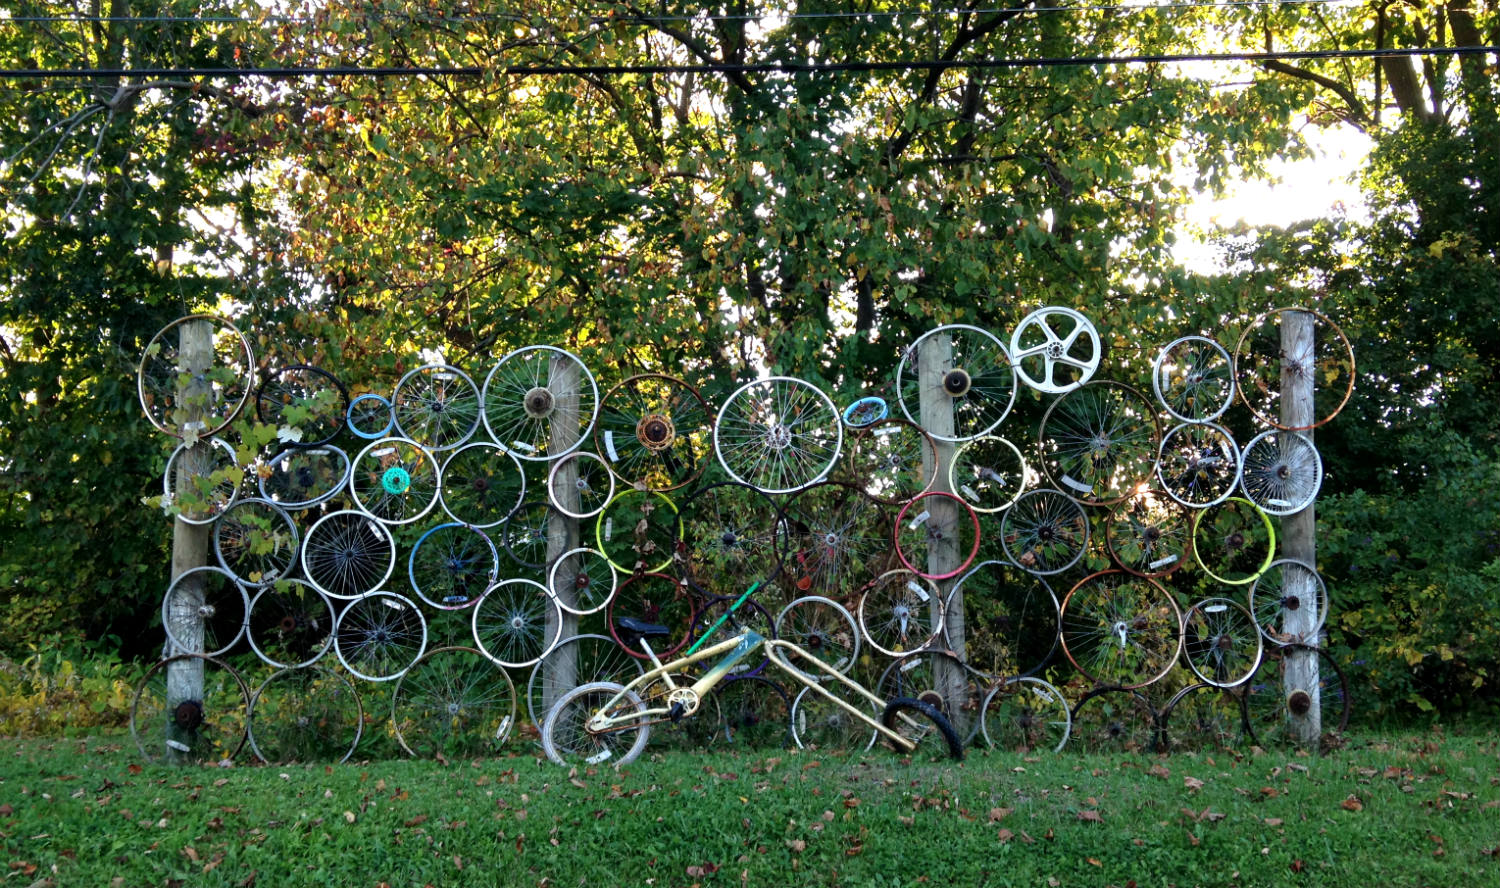 Bicycle Art and Yard Sculptures - Palmyra, NY Wheel Fence